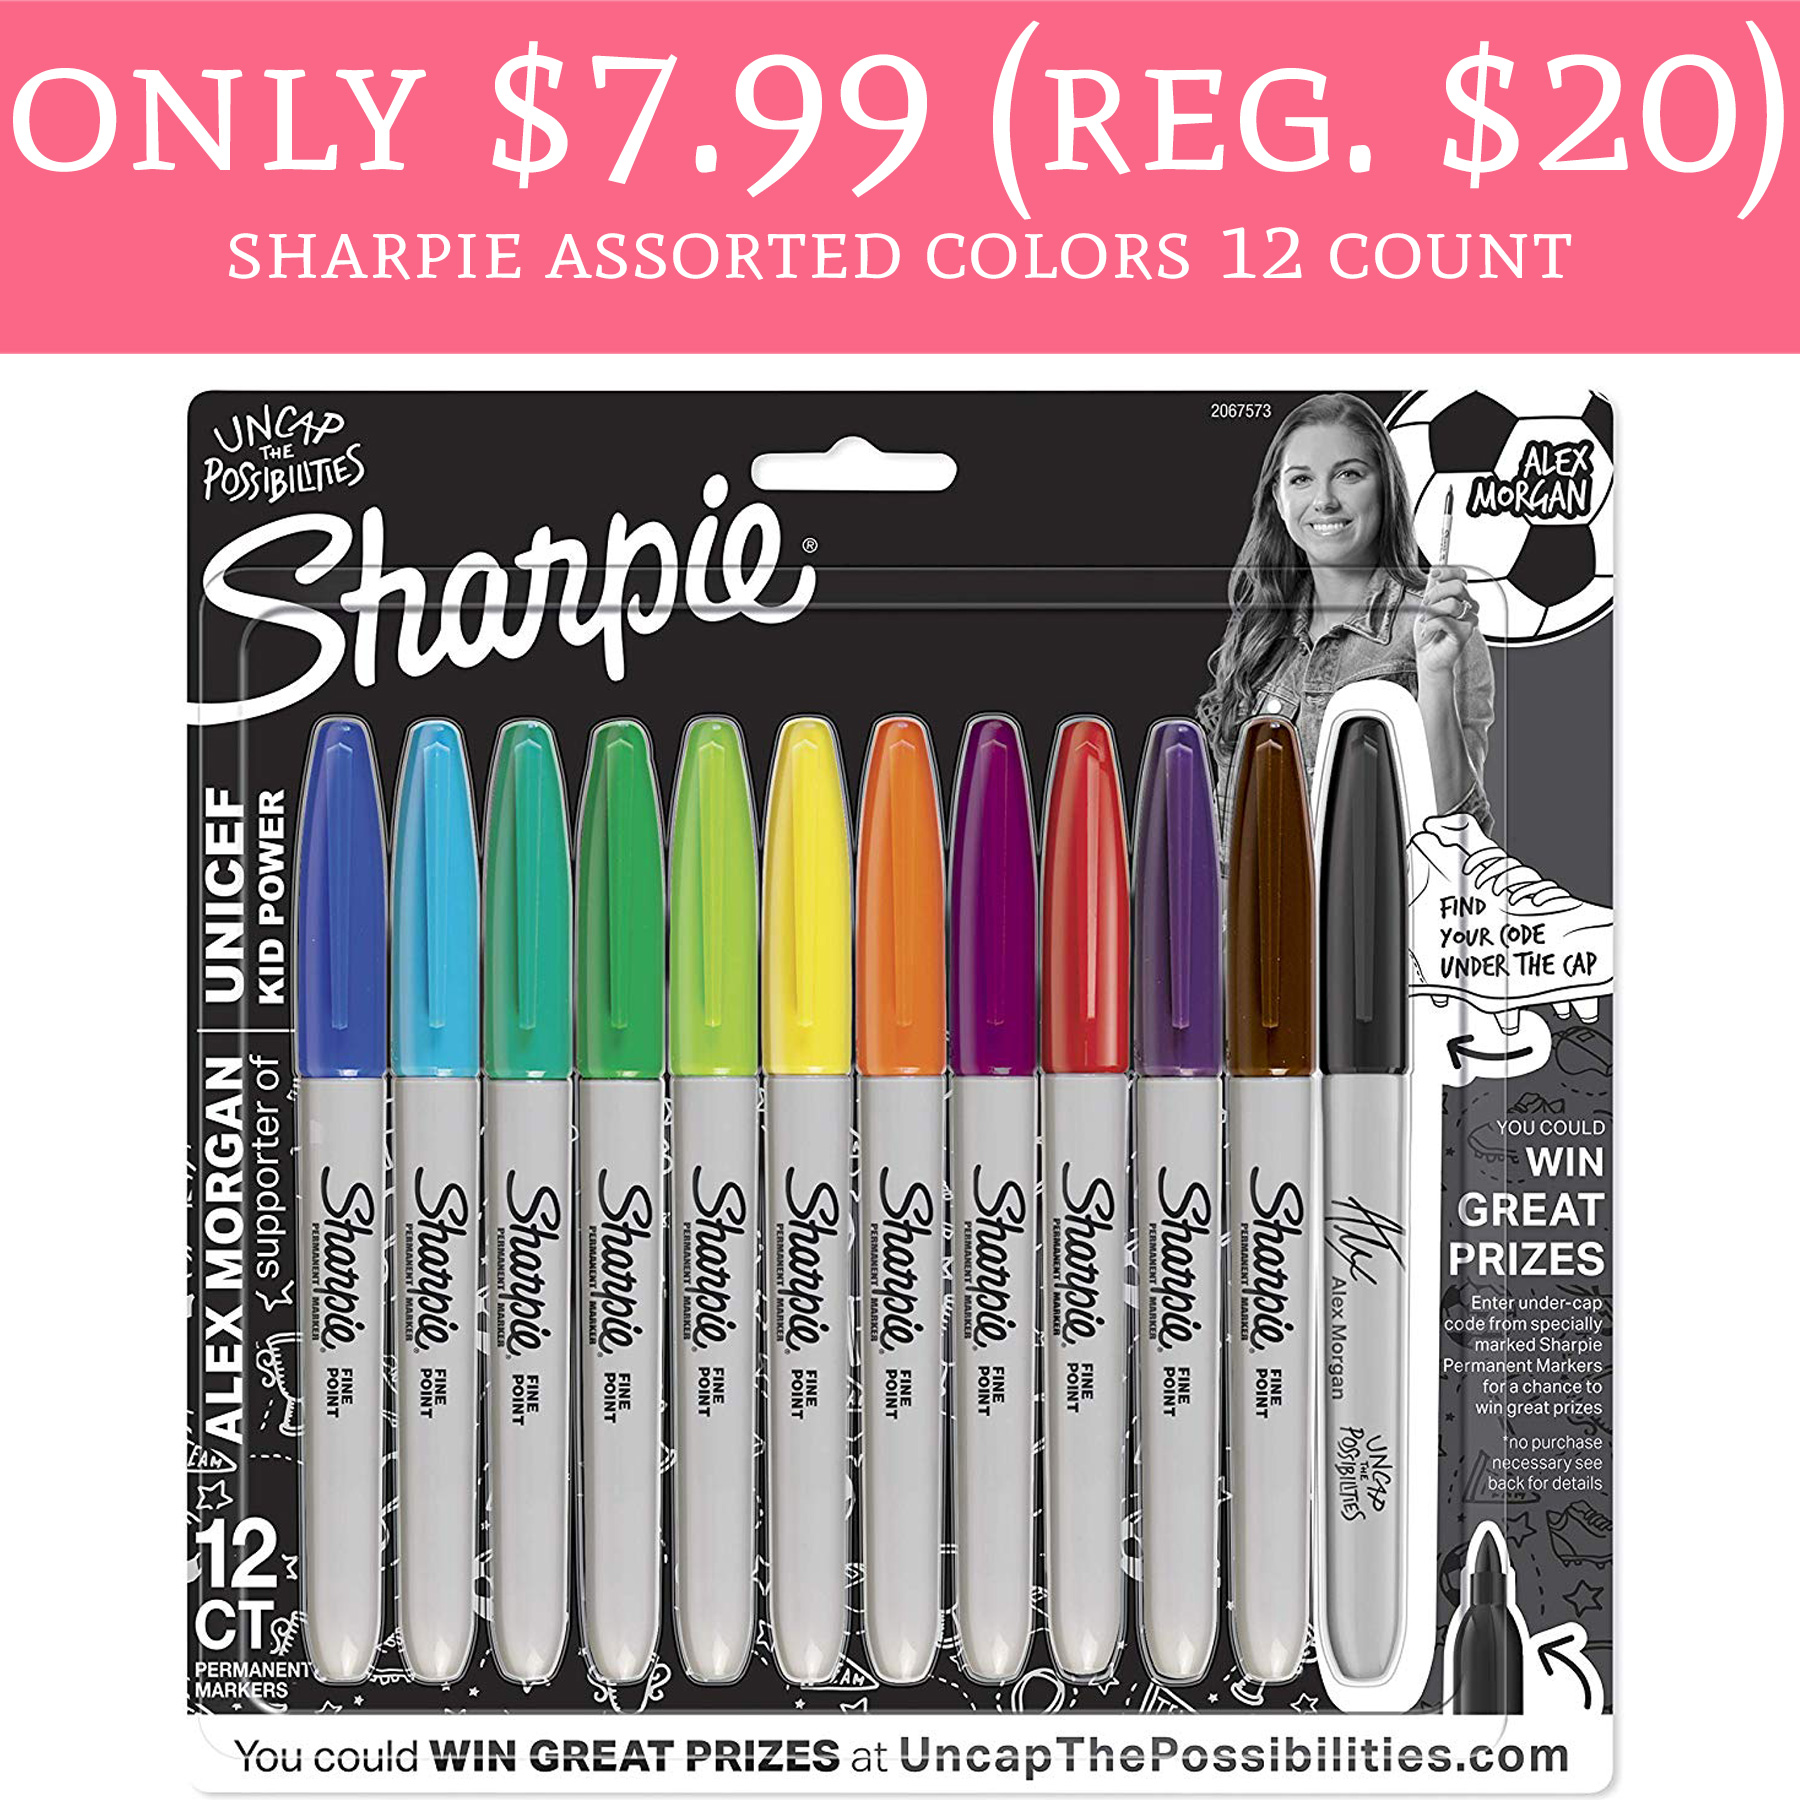 sharpie-assorted-colors-12-count